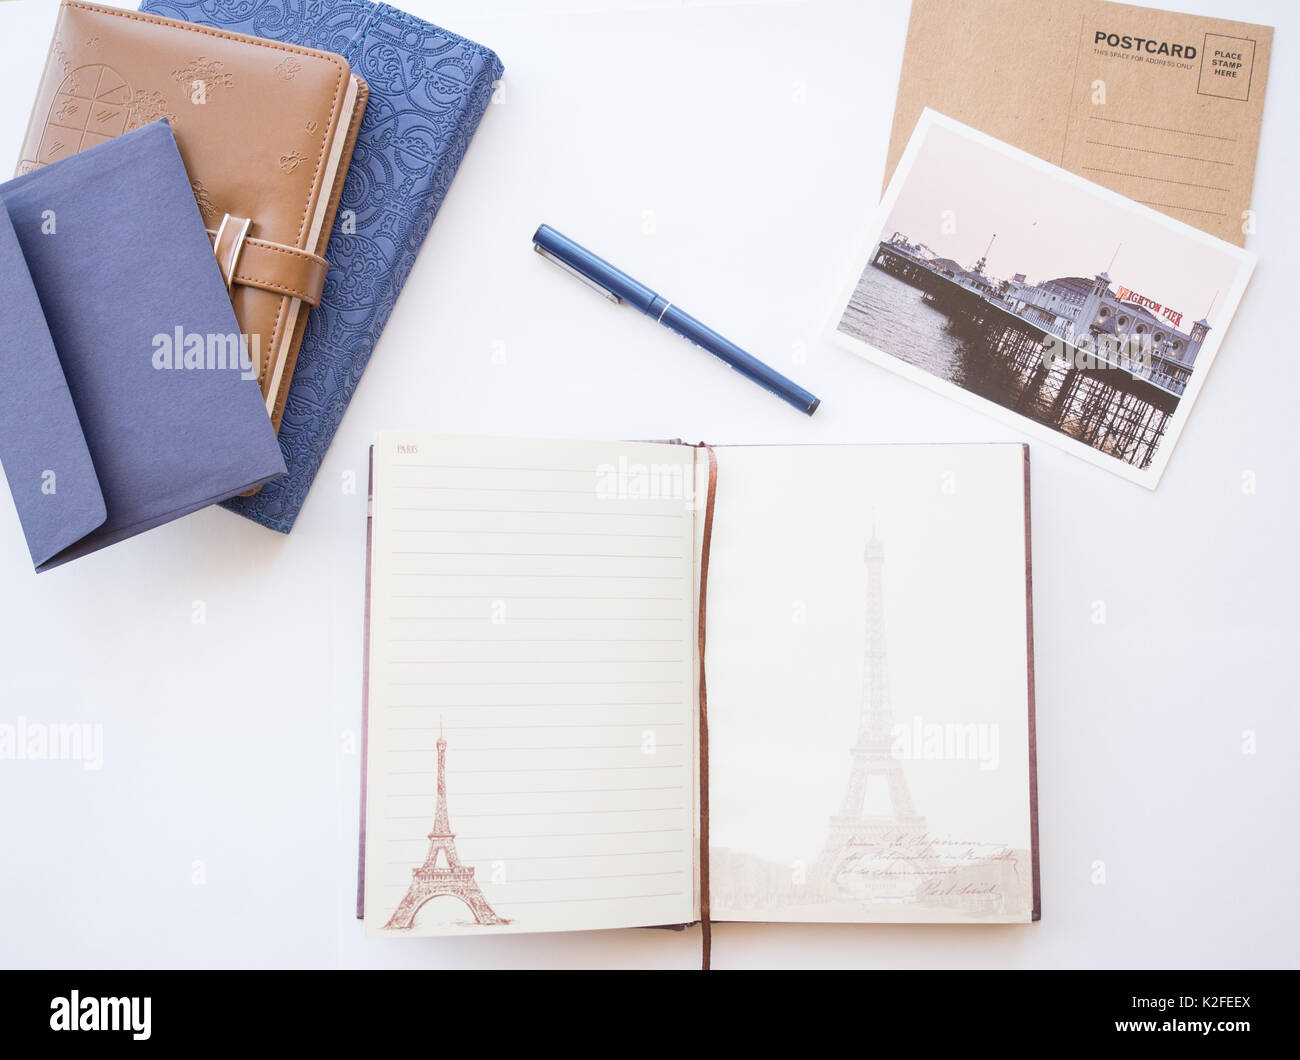 Concept from different type of notebooks, blue envelope and post cards on a white background. Stock Photo